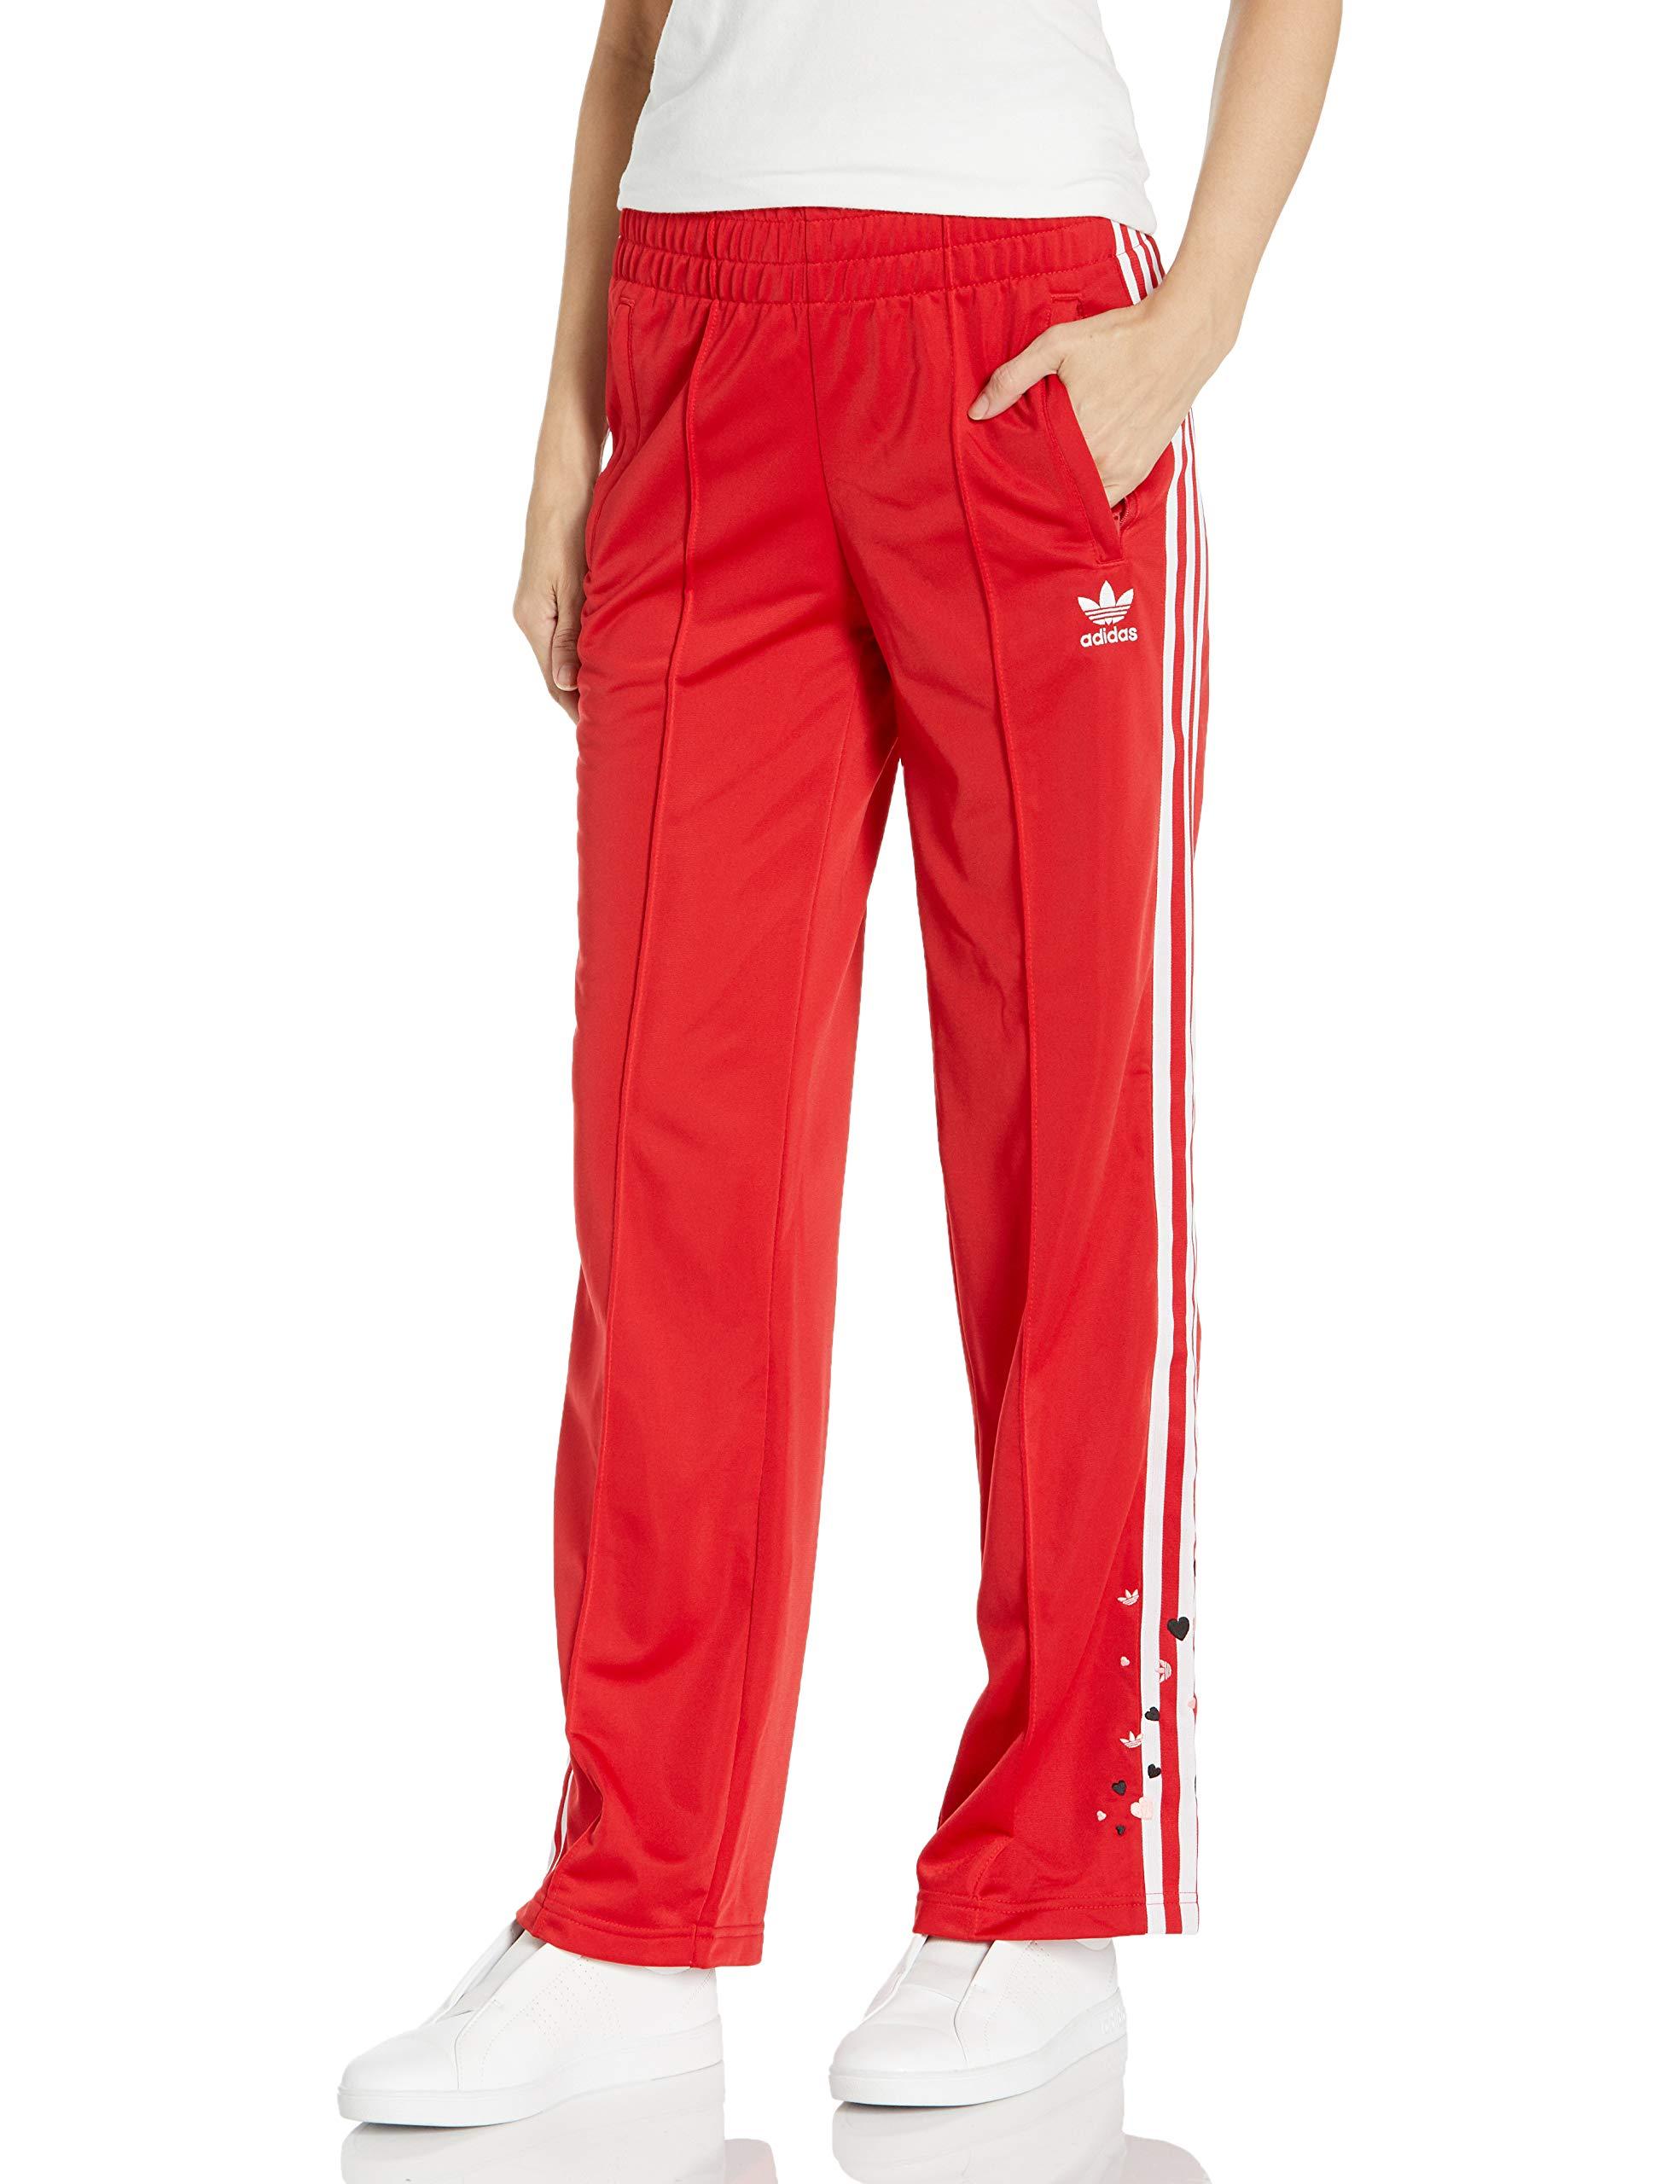 adidas Originals Track Pants in Scarlet (Red) - Lyst